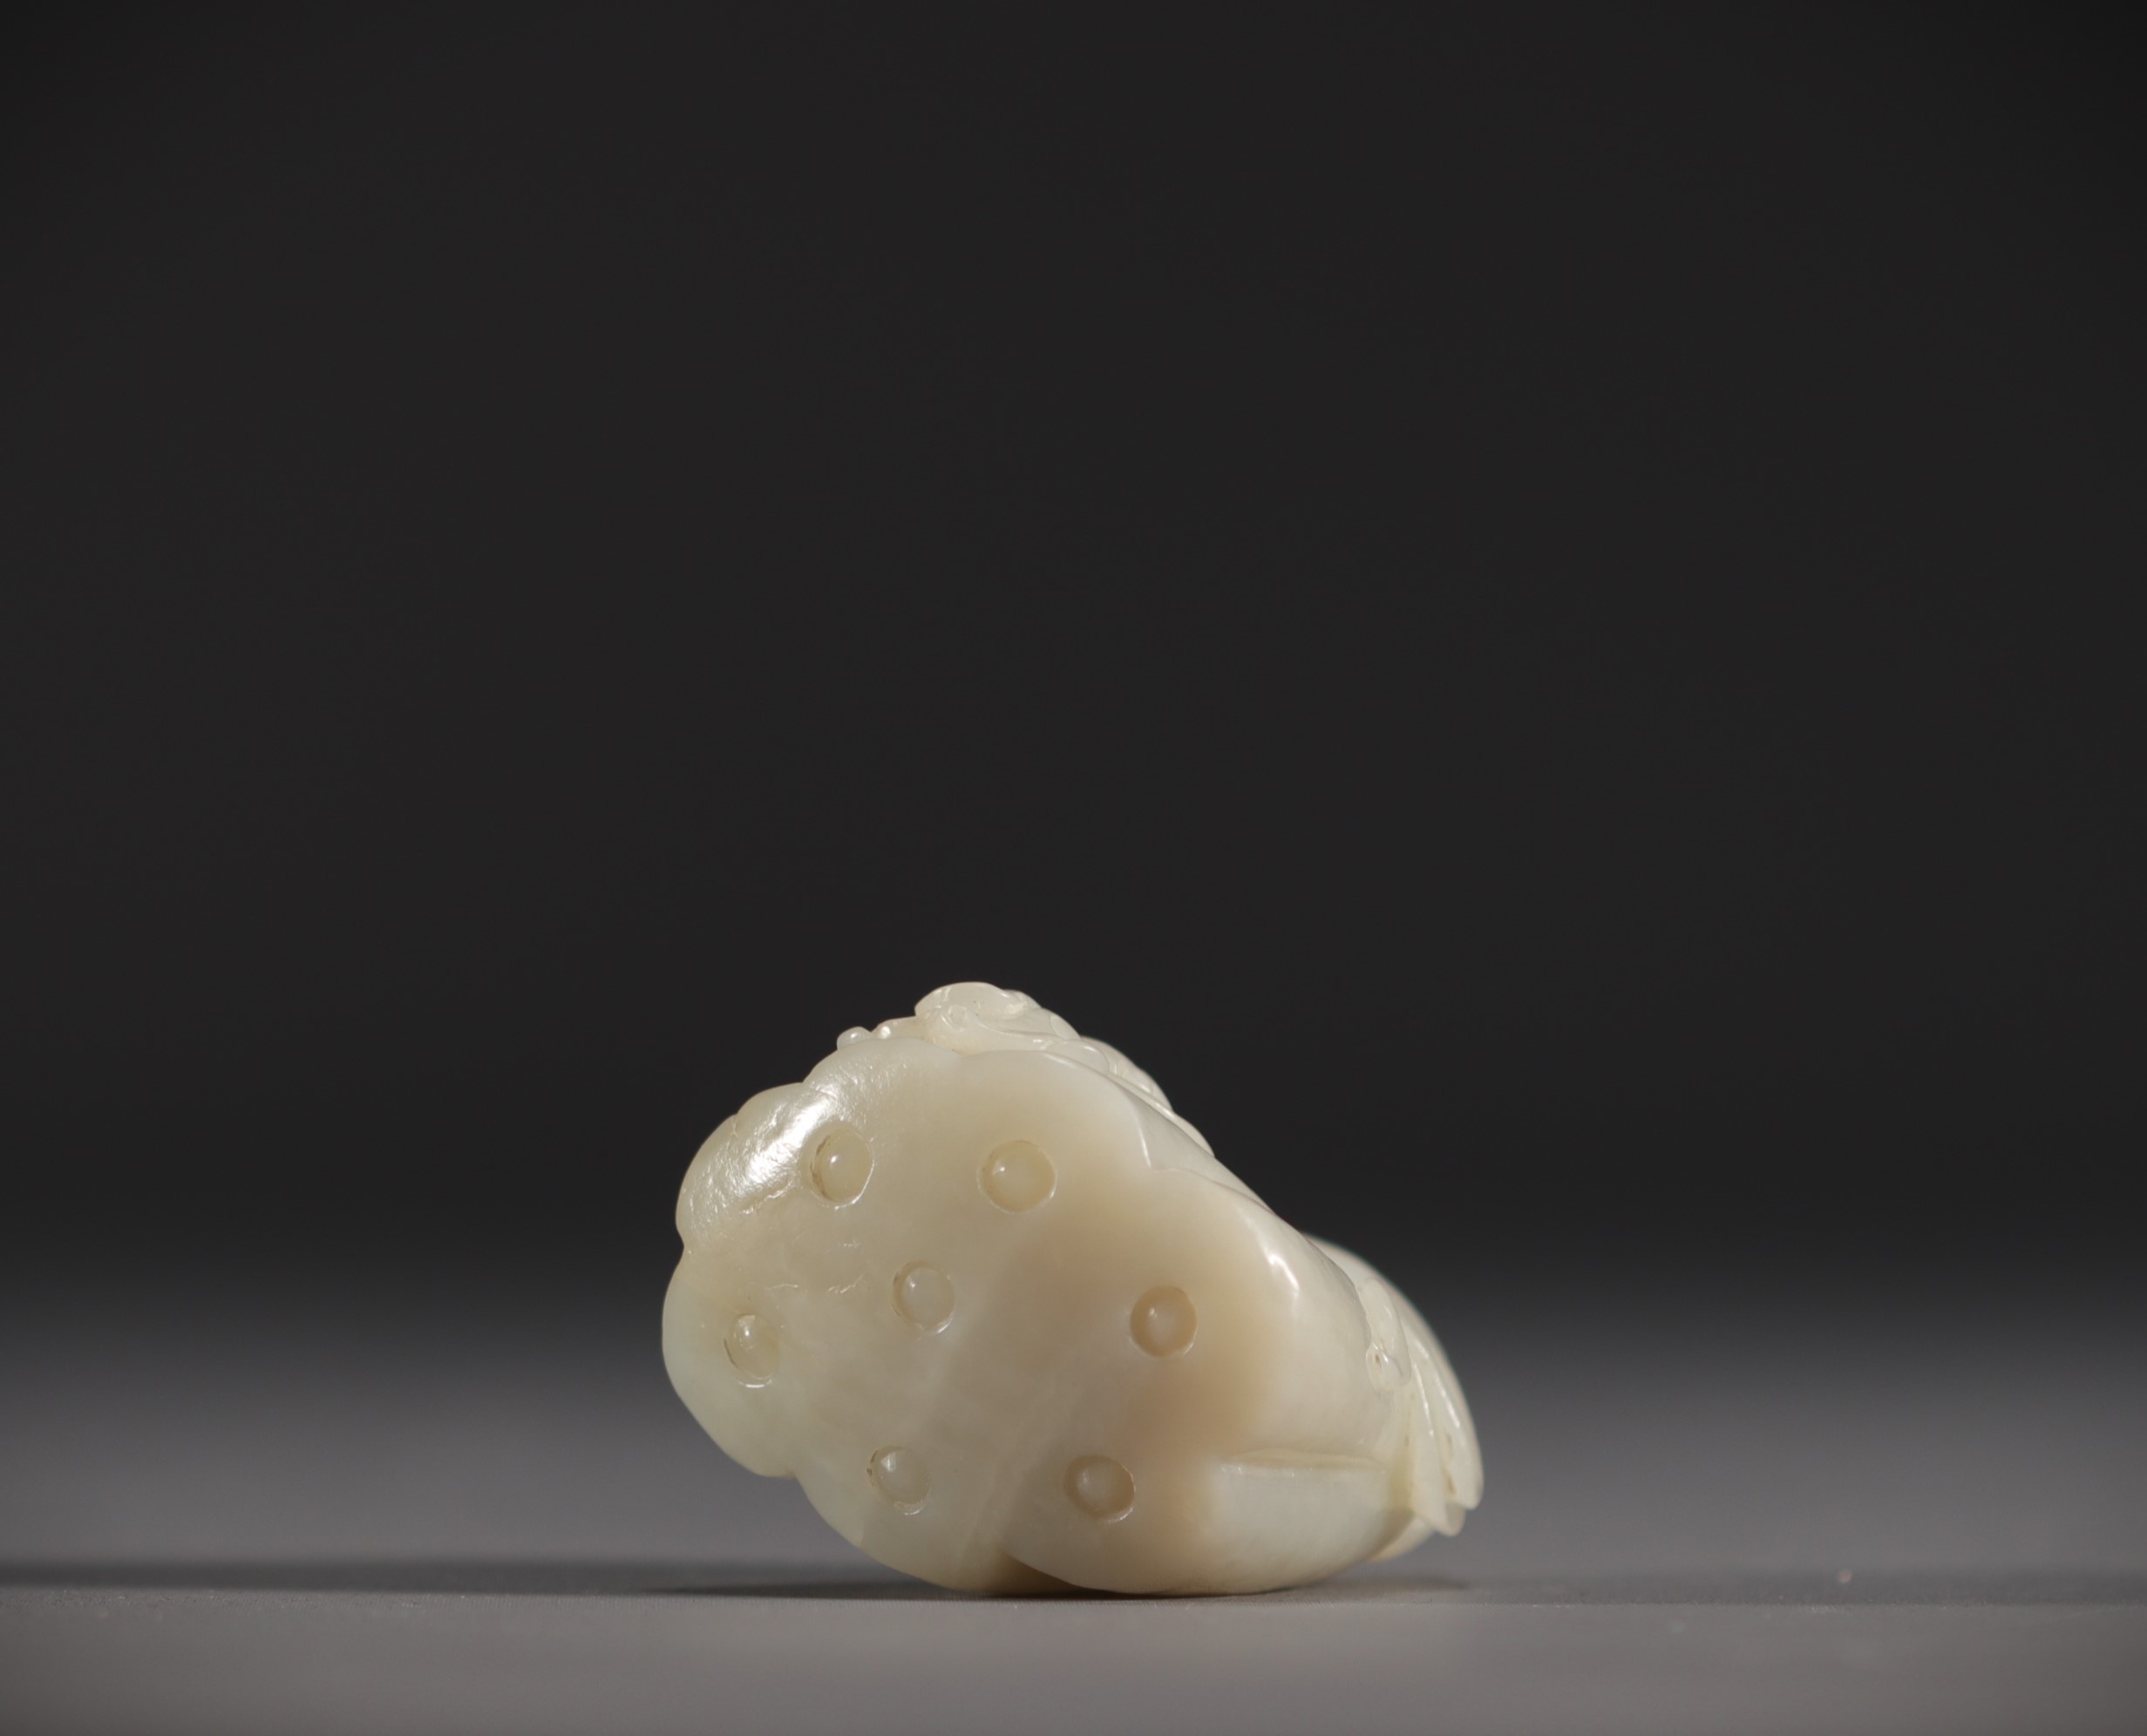 China - White jade pendant in the shape of a fruit surmounted by a young child. - Image 6 of 6